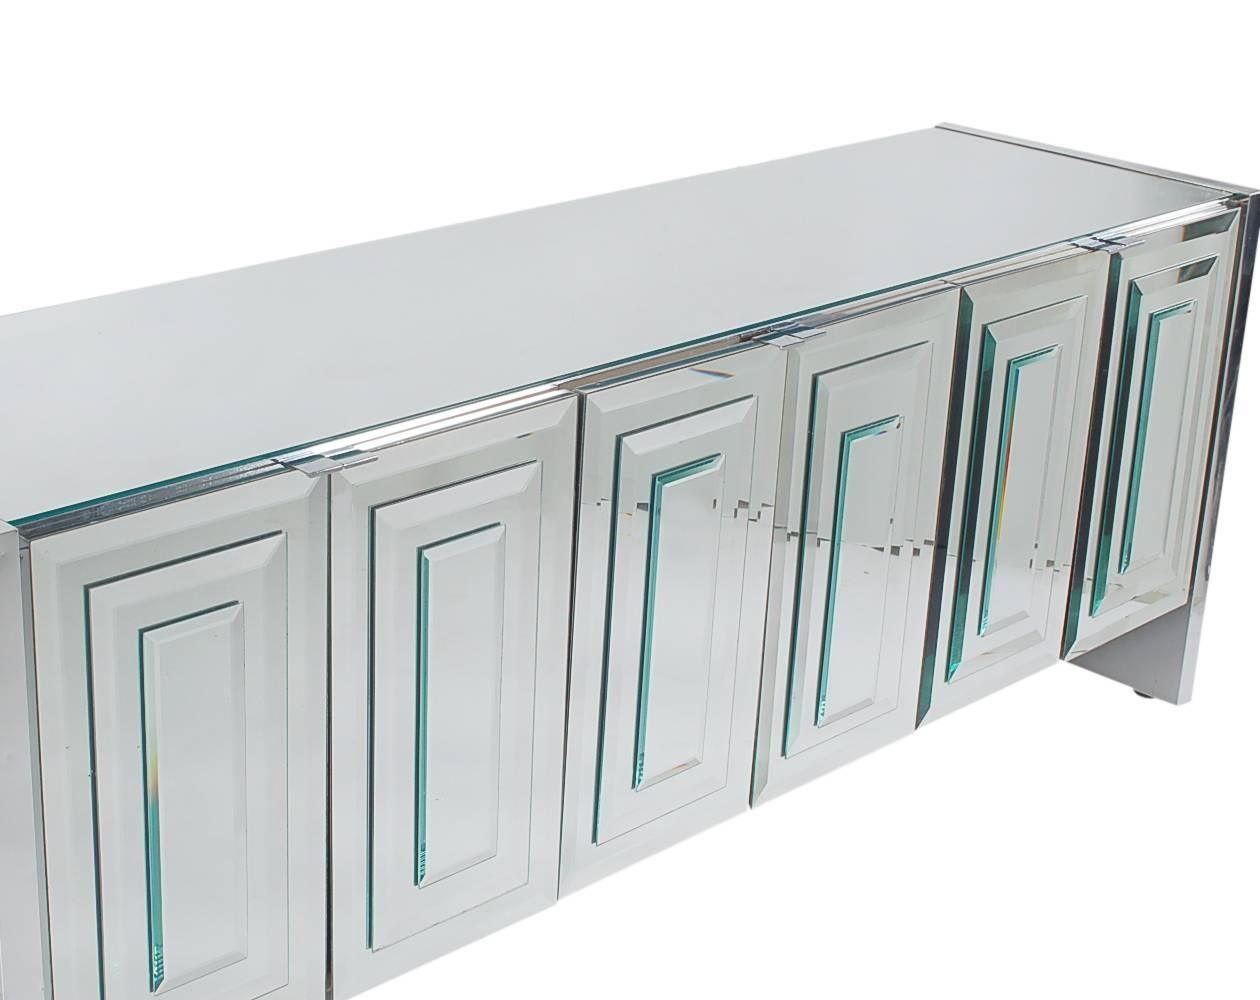 Mid-Century Modern Mirrored Art Deco Credenza / Cabinet by Ello after Pierre Cardin or Paul Evans